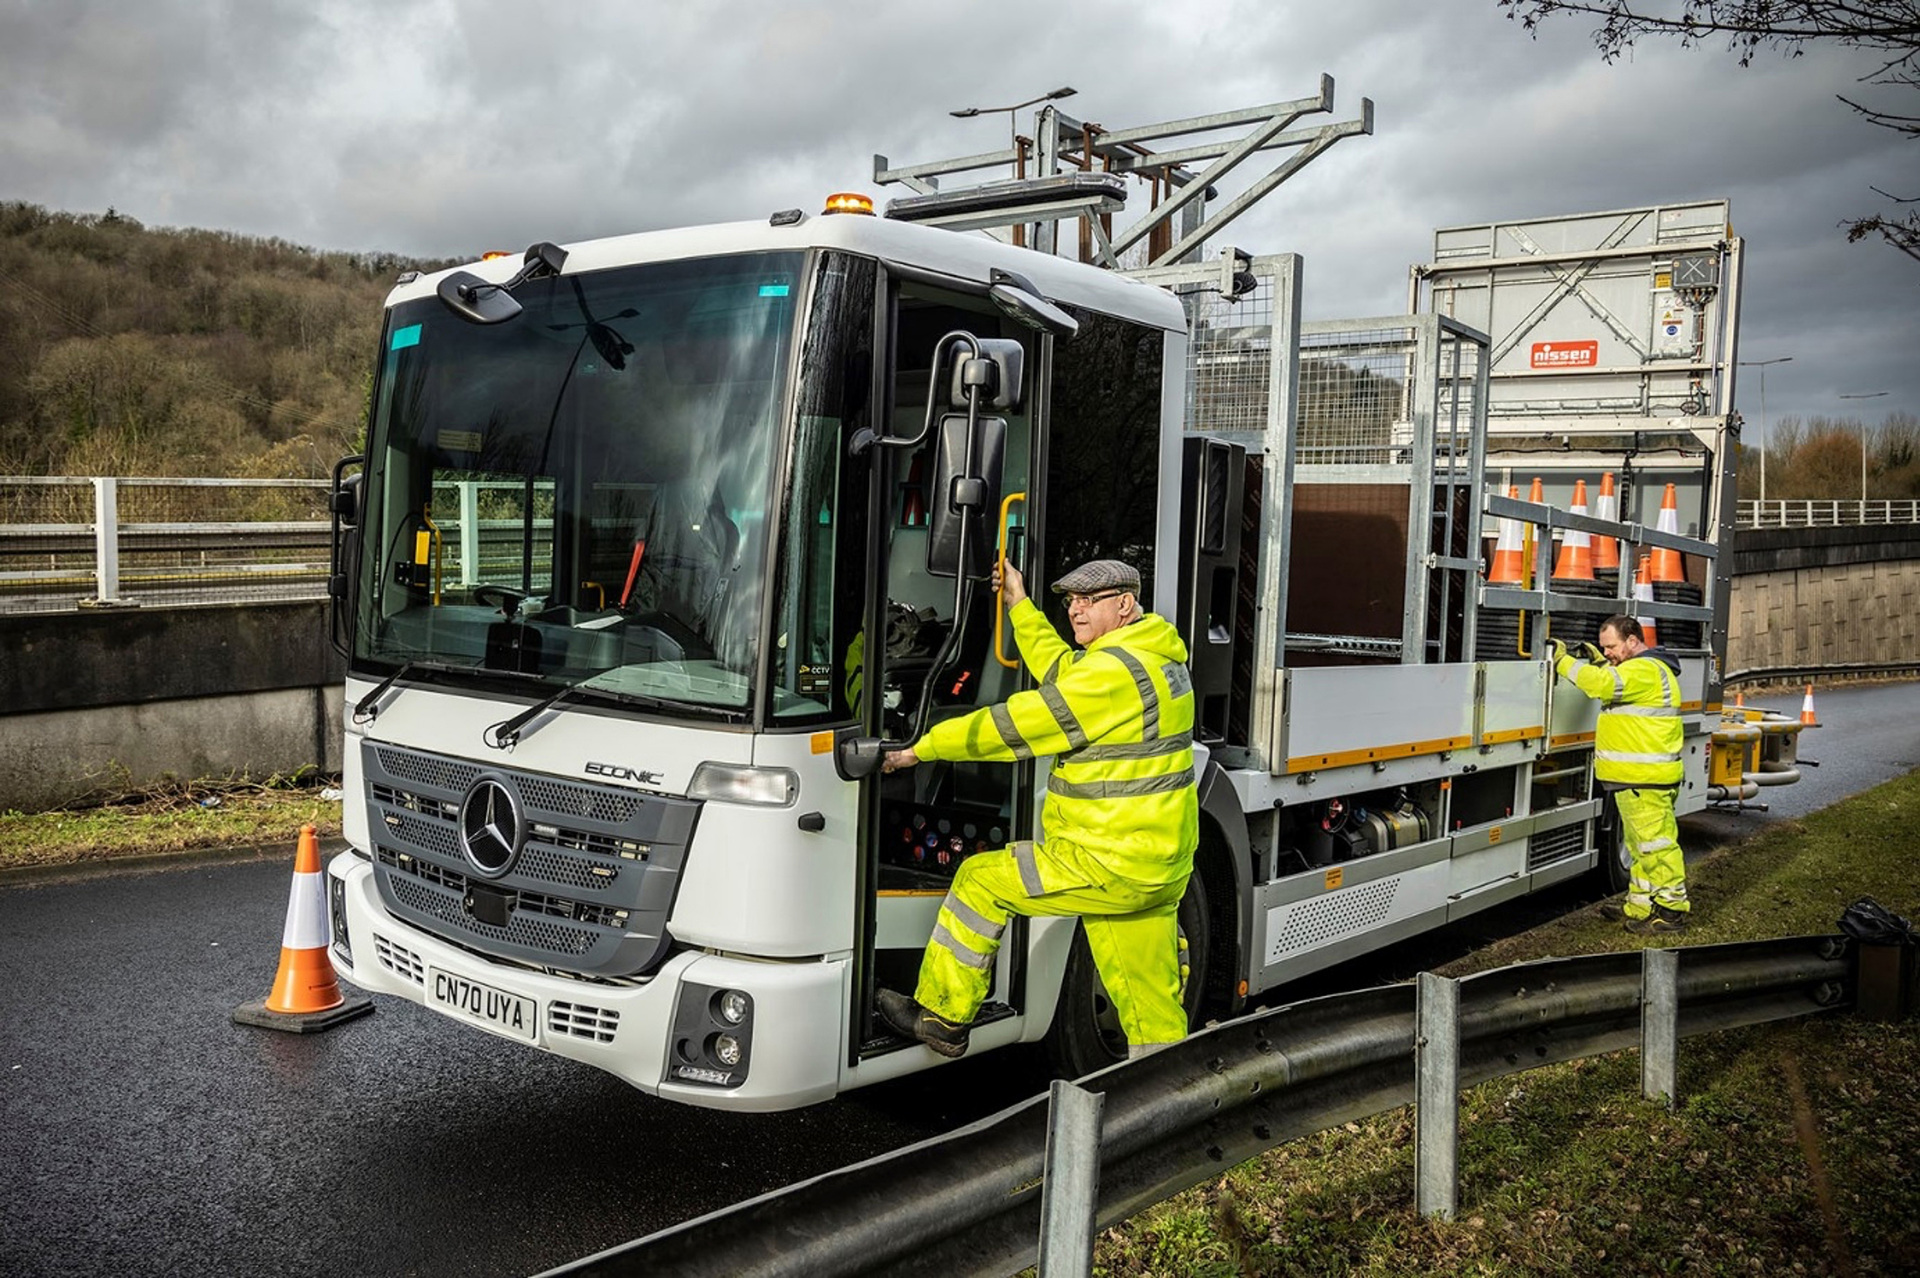 Two new Econic vehicles with a special body keep roads safe in Cardiff